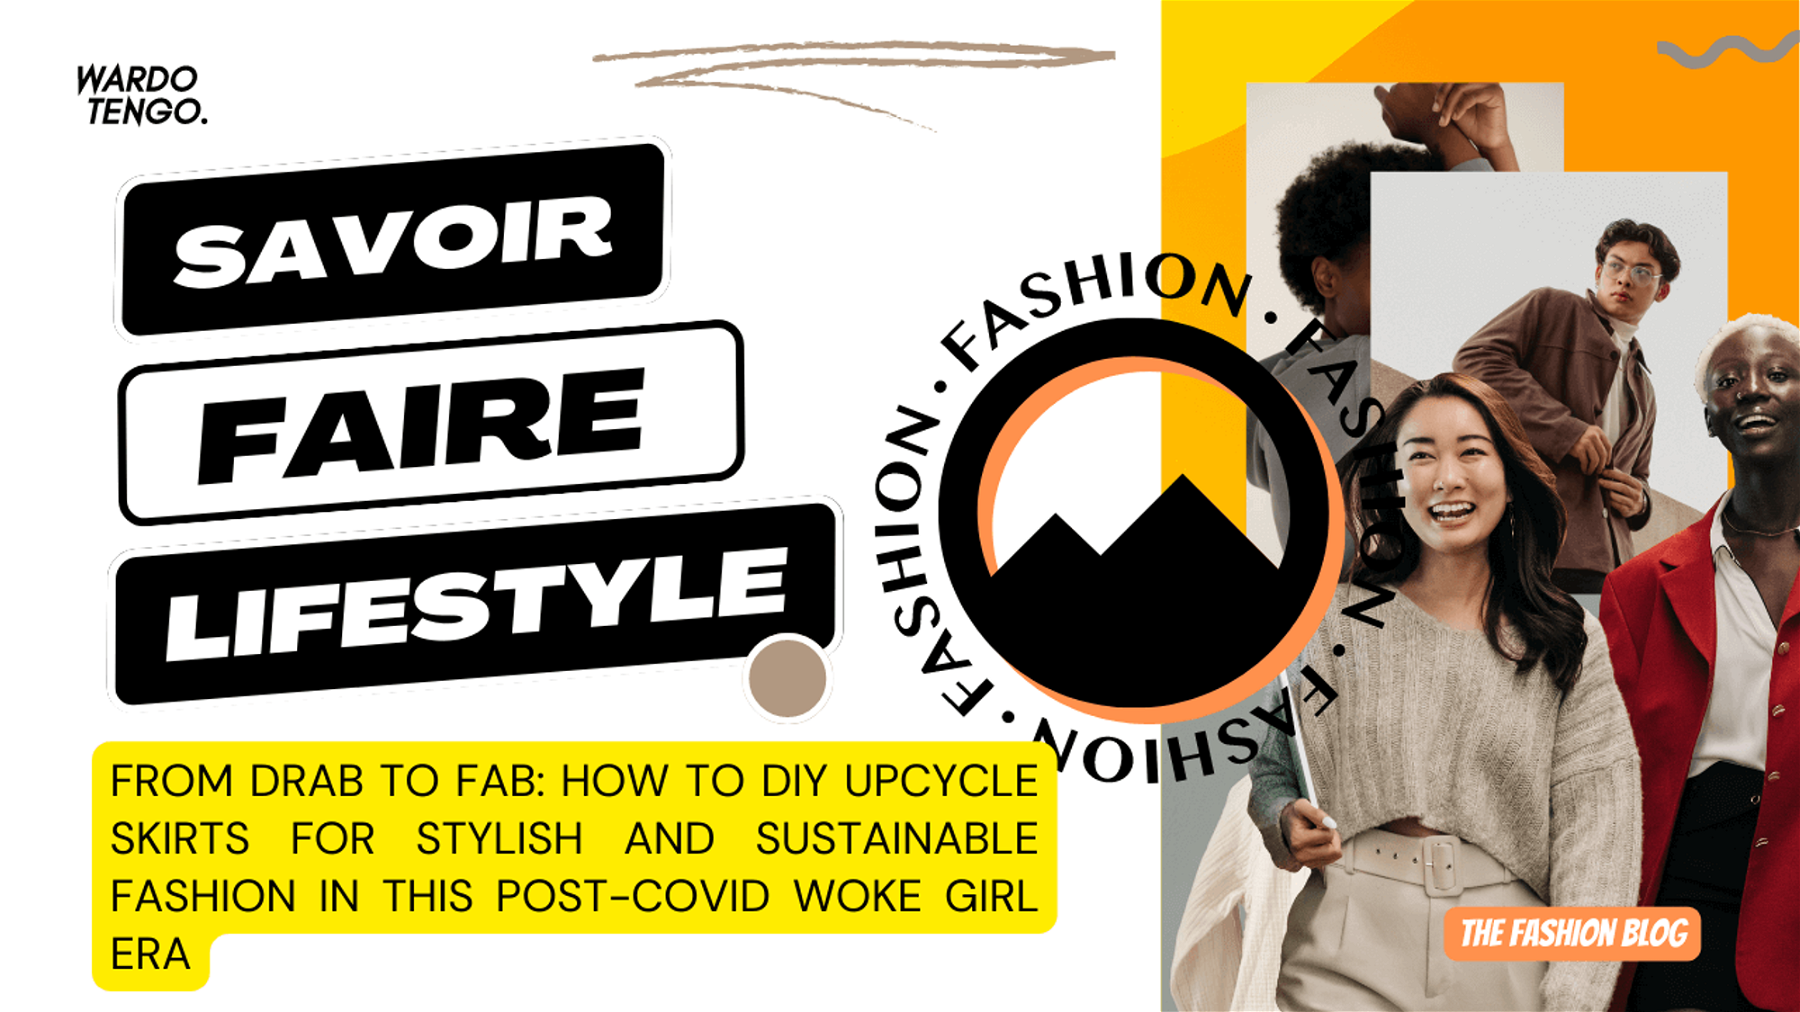 From Drab to Fab: How to DIY Upcycle Skirts for Stylish and Sustainable Fashion in This Post-Covid Woke Girl Era